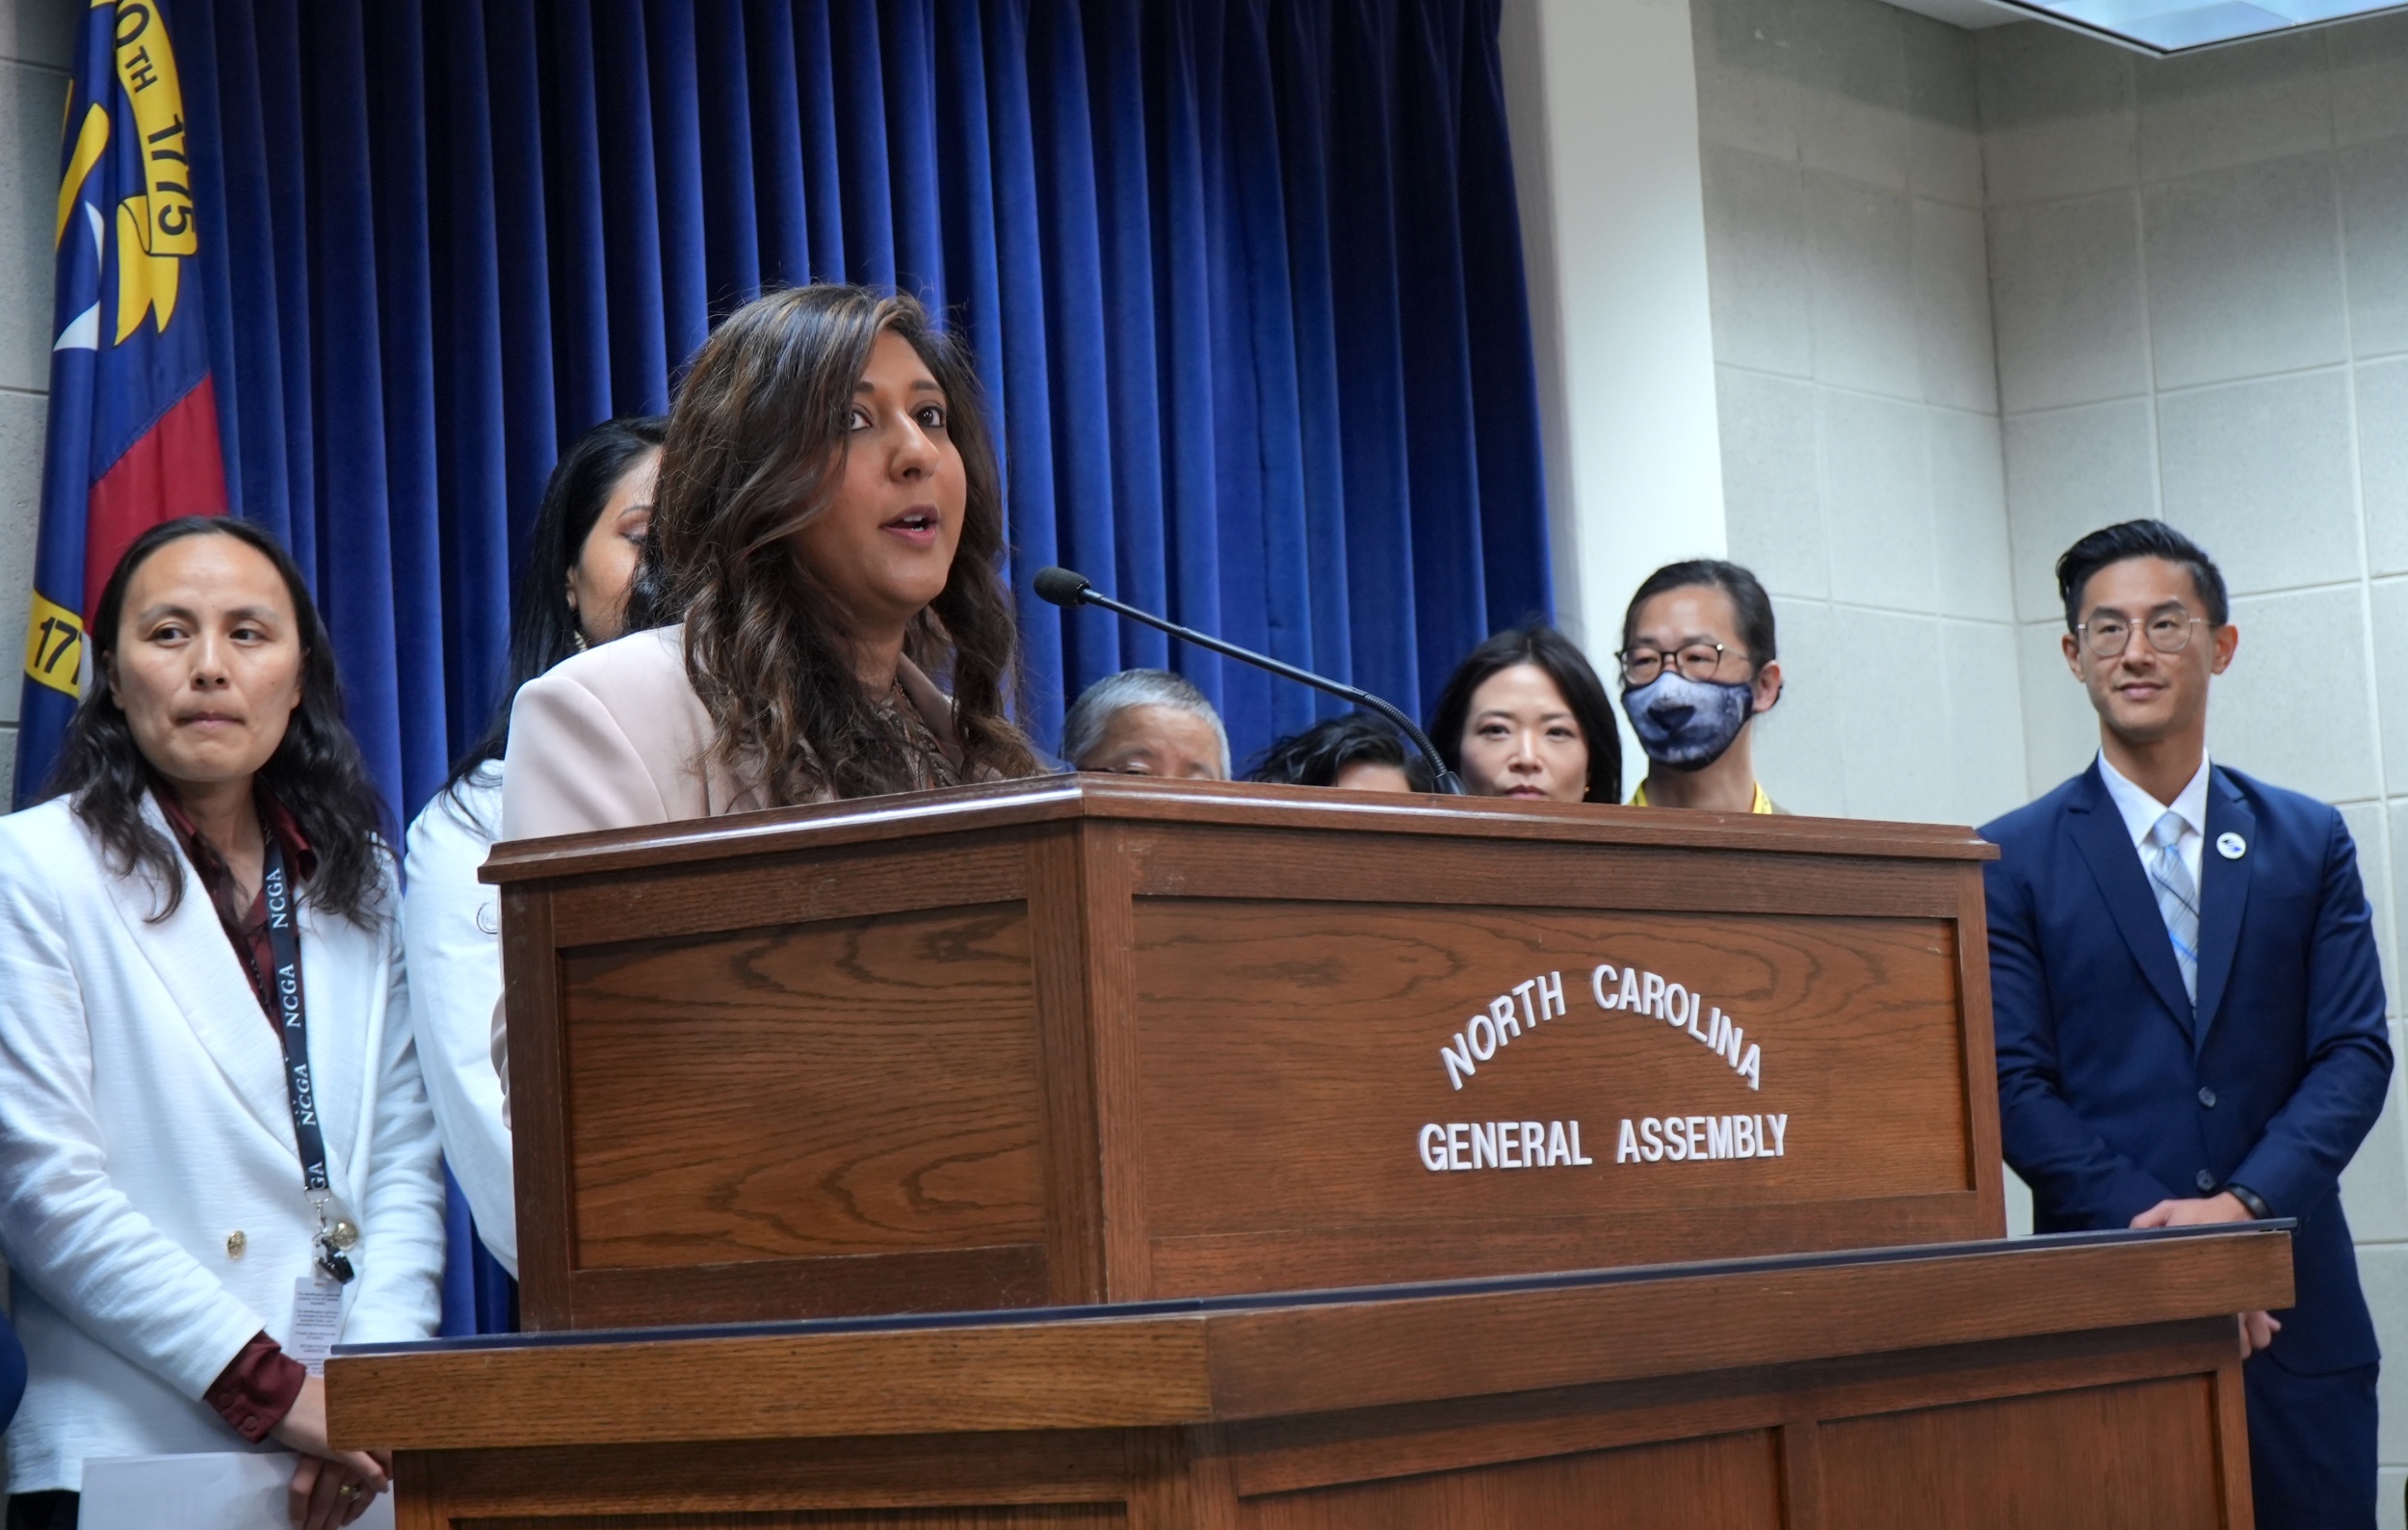 An Indian American woman speaks at a wooden podium that has the words "North Carolina General Assembly" attached to the front. Several other people who are Asian American stand behind the woman, watching her speak.